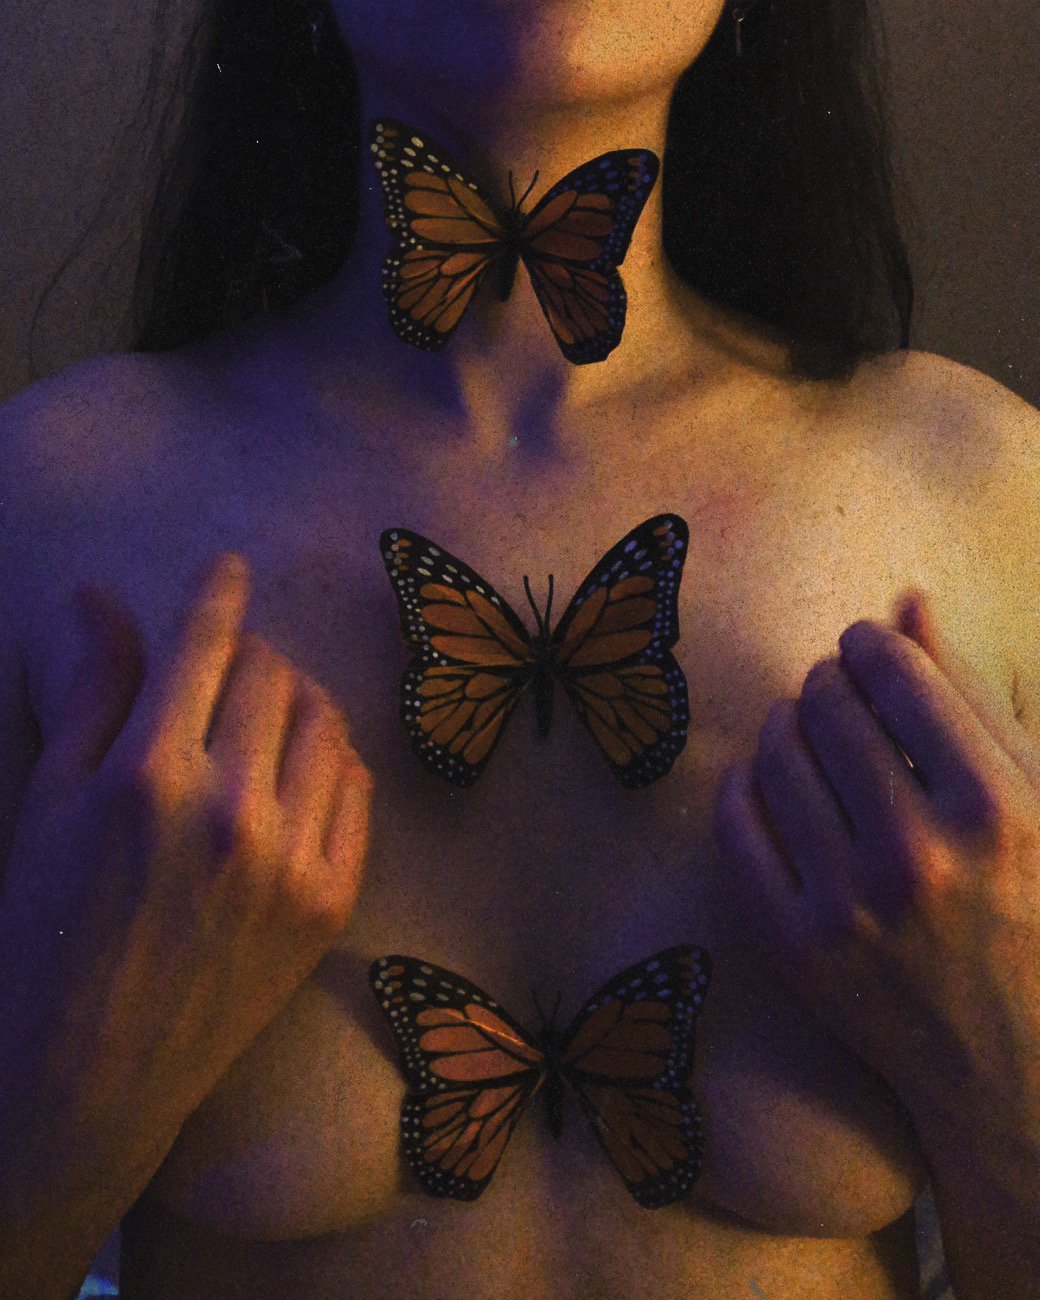 boobs butterfly facetime girl nude pretty romantic skin woman